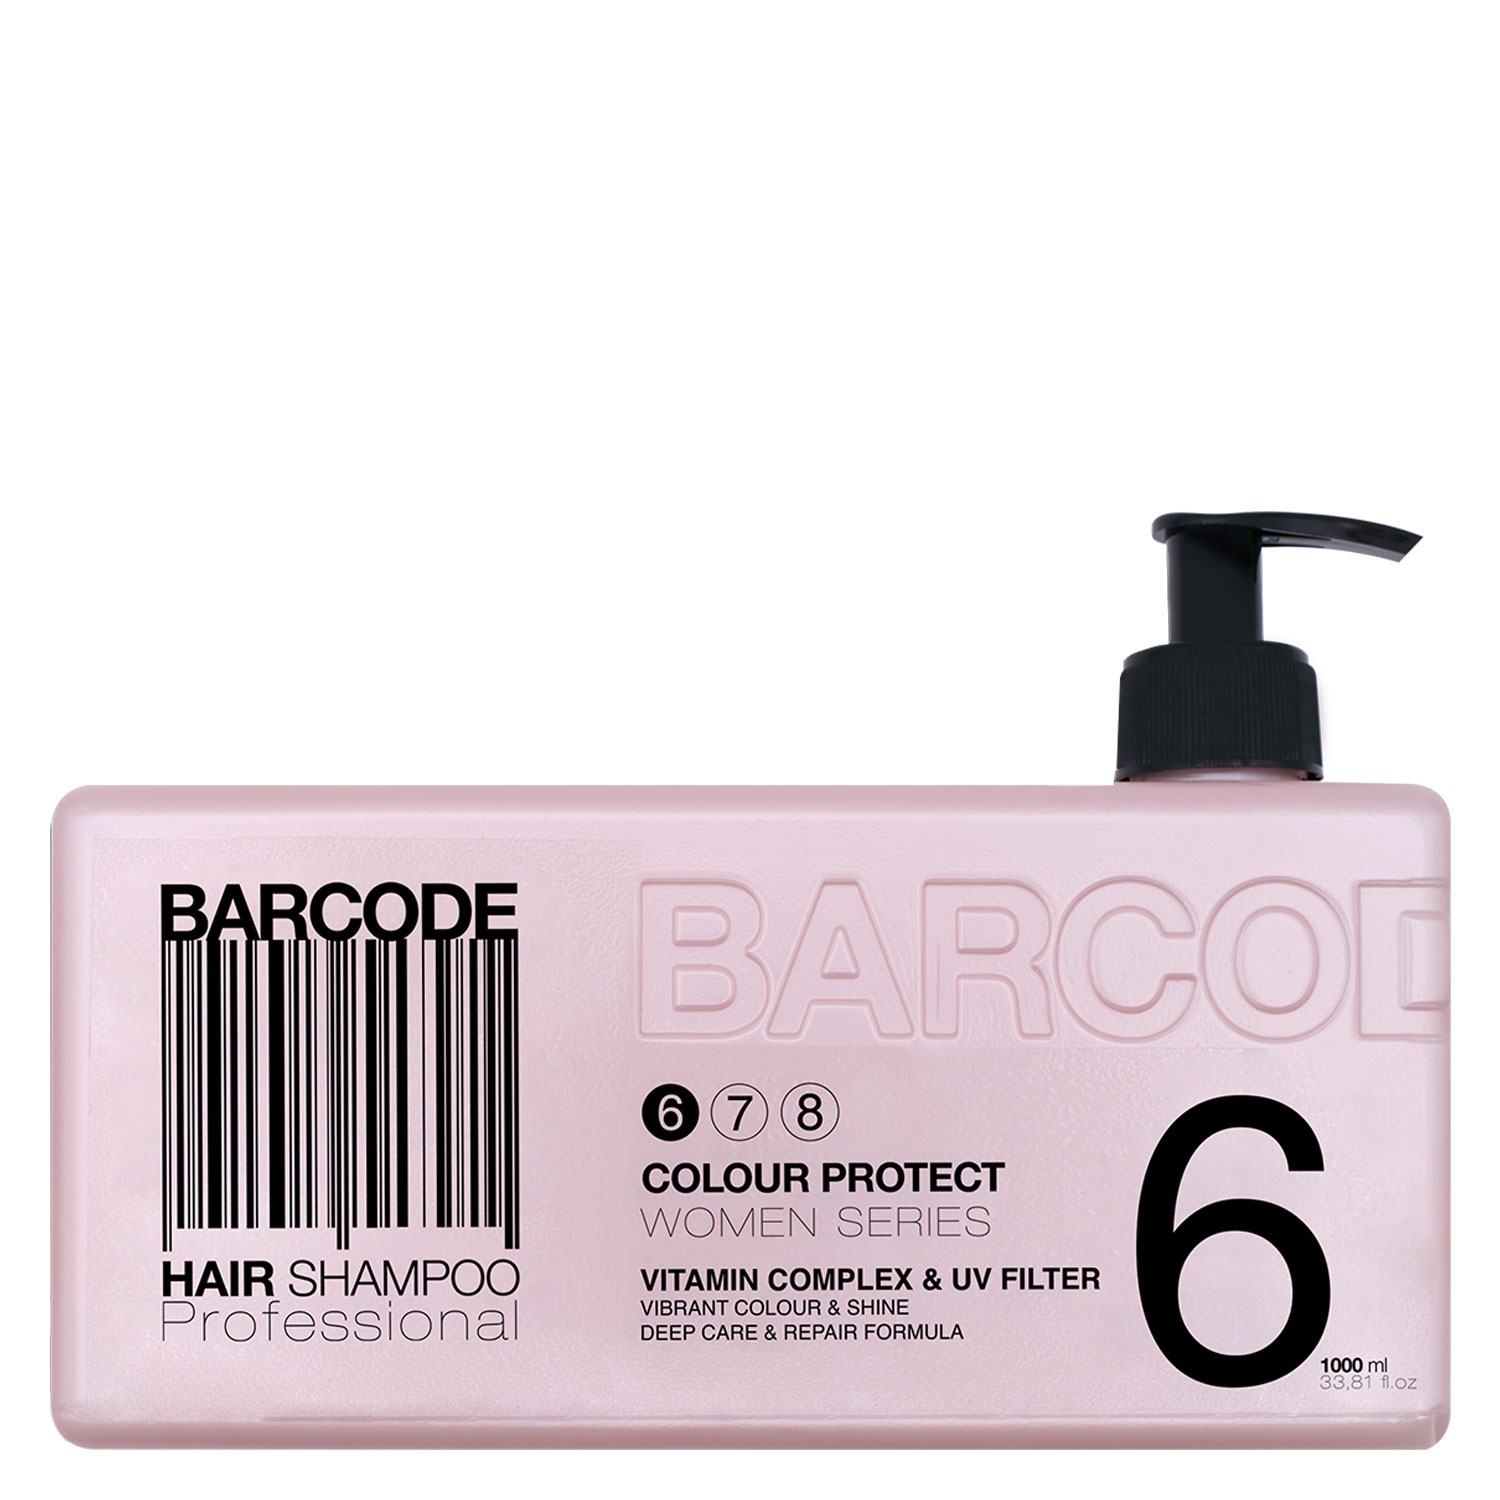 Product image from Barcode Women Series - Hair Shampoo Colour Protect